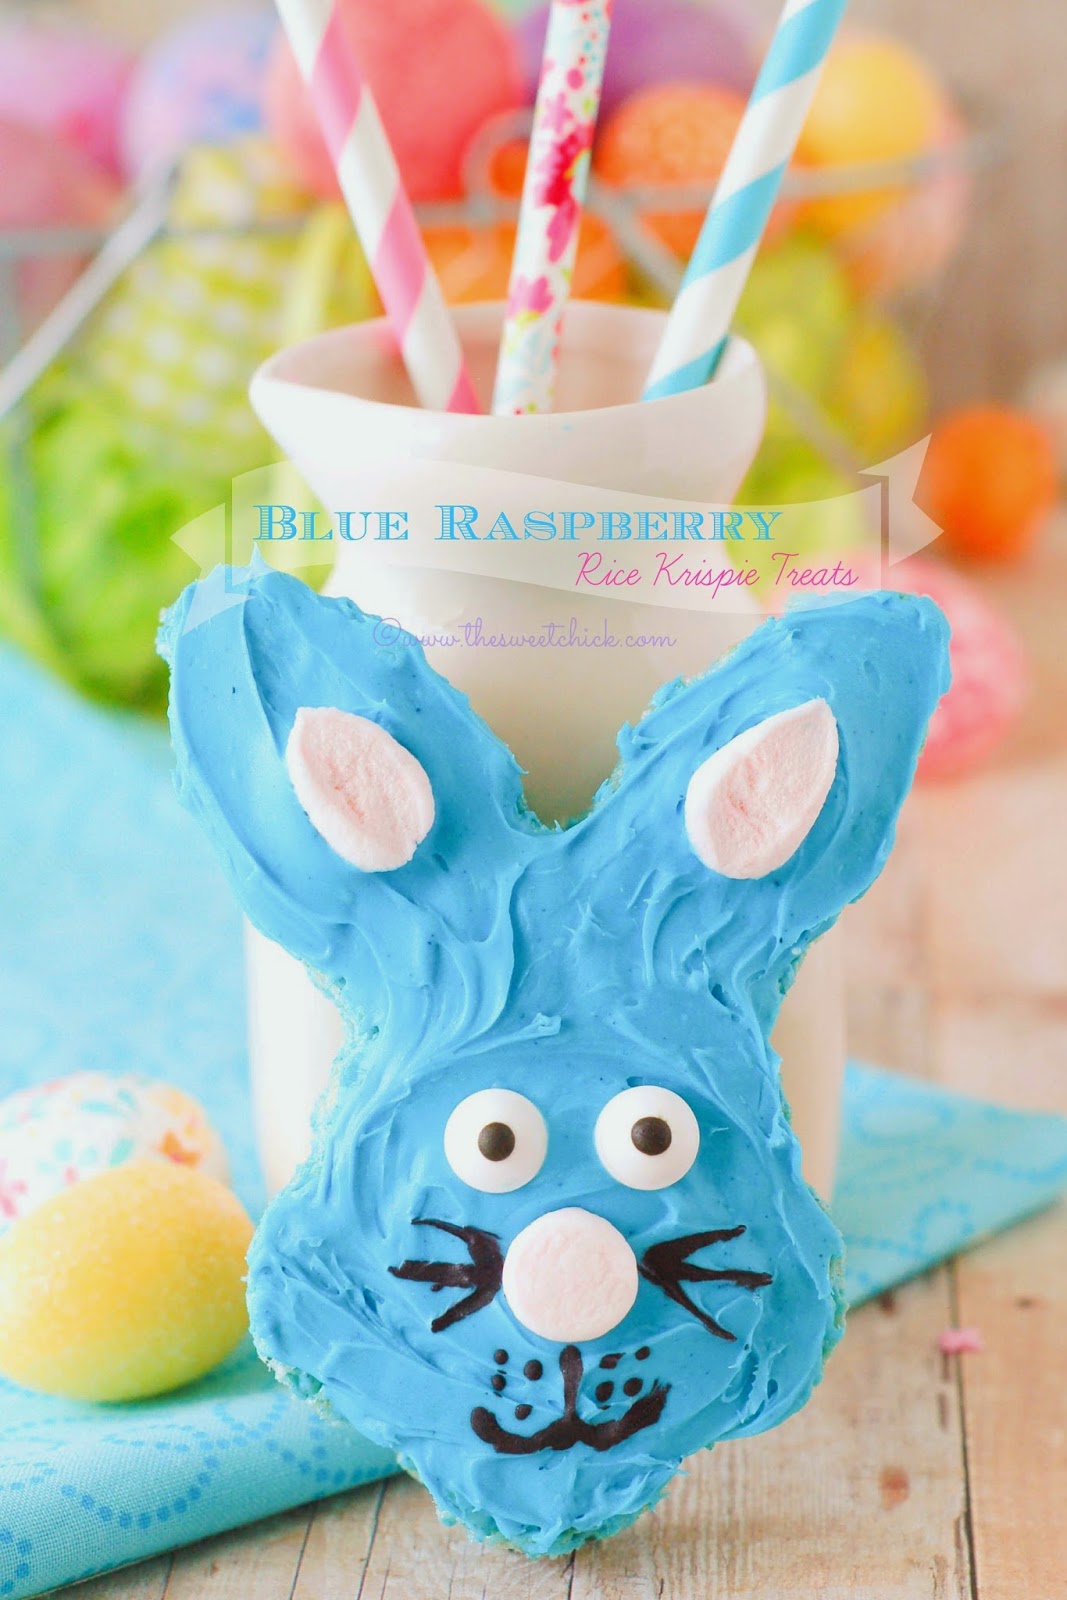 Blue Raspberry Rice Krispie Bunny by The Sweet Chick